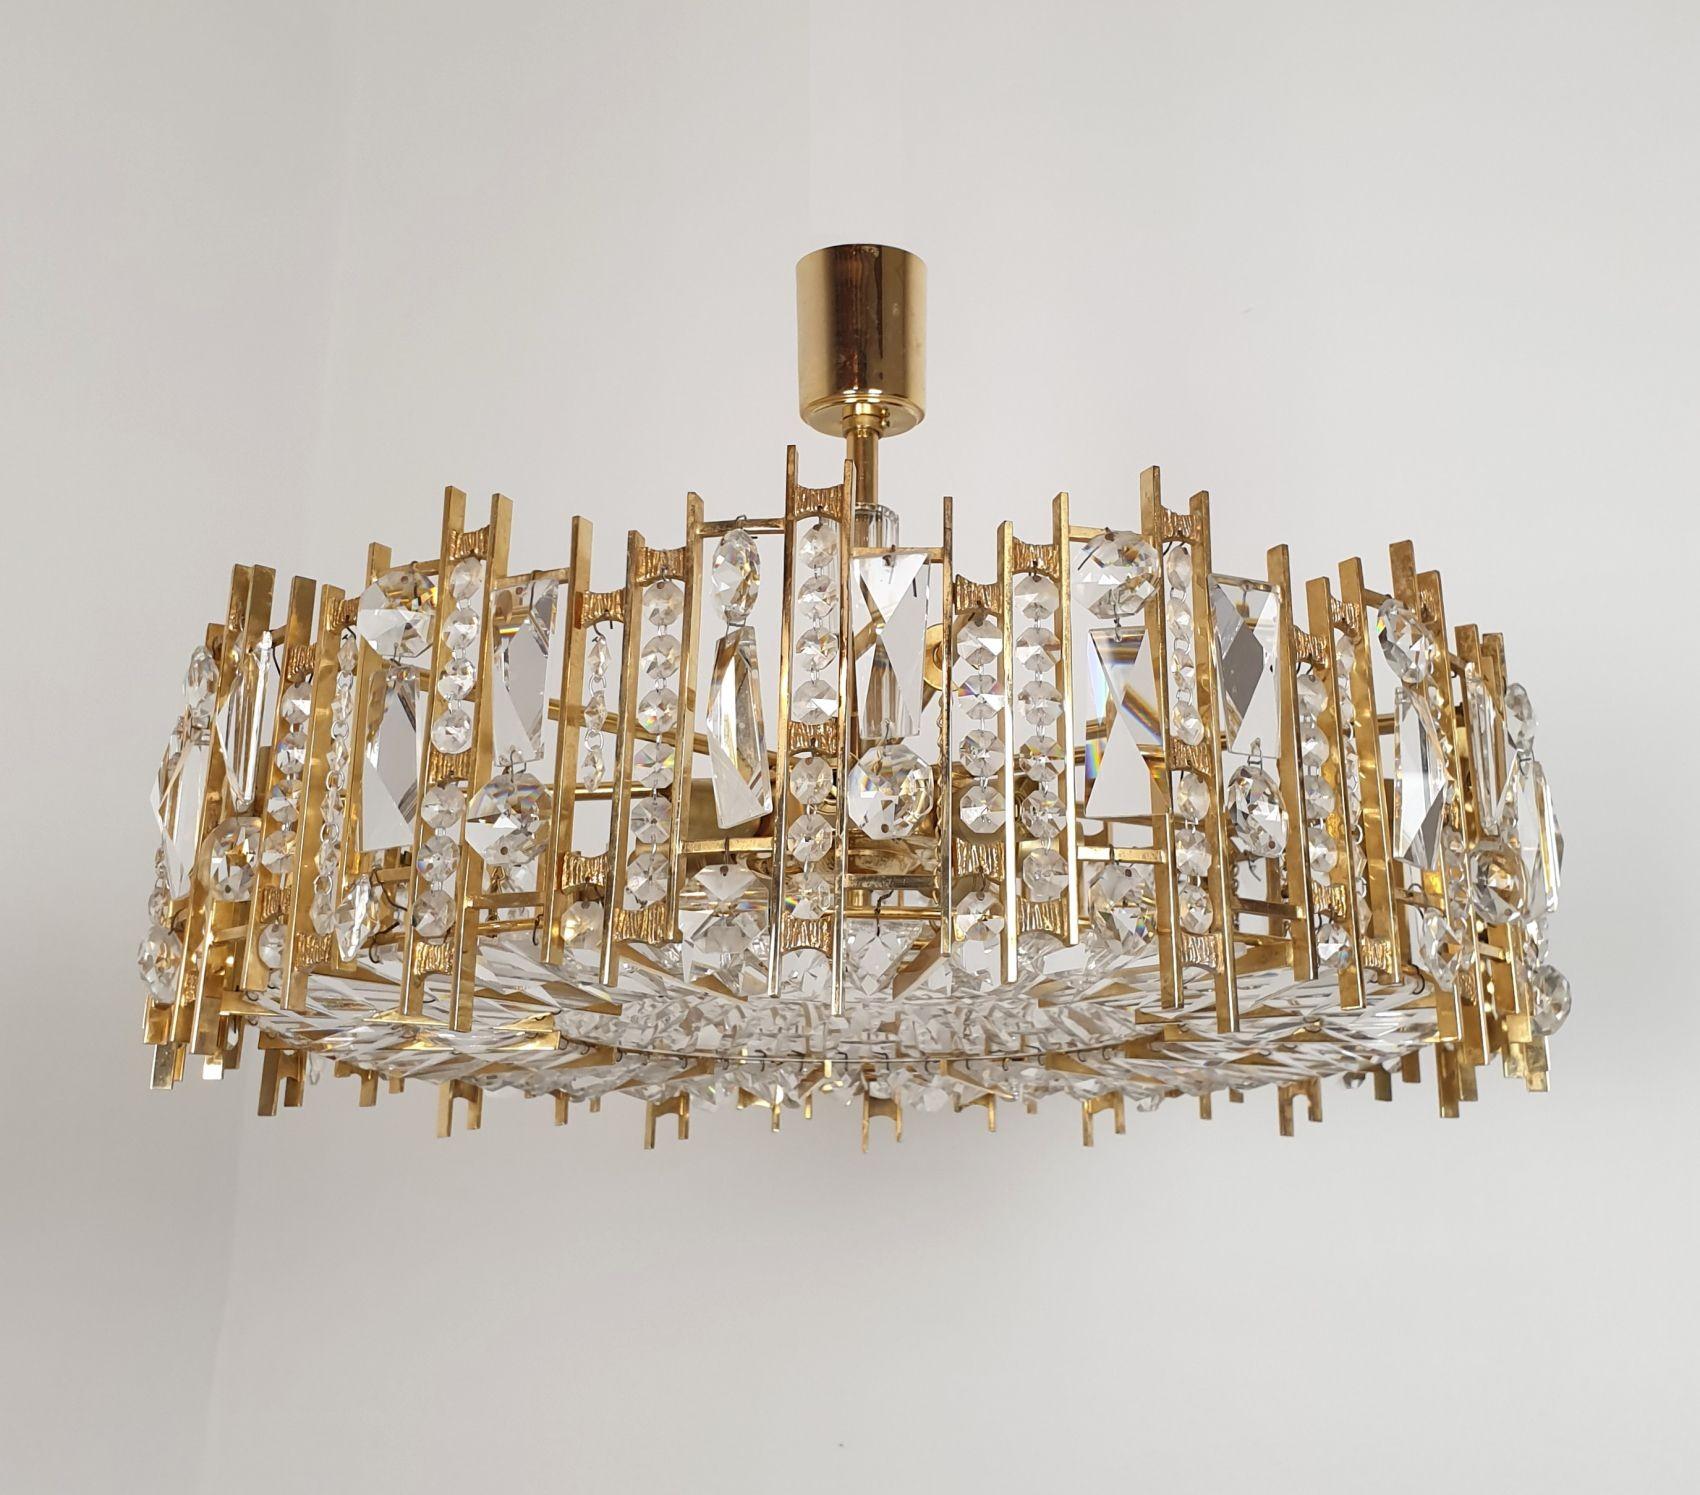 Bronze, brass and crystals chandelier attributed to Palwa, Germany 1960s.
The mid-century chandelier has 7 lights and is rewired for the US, with Candelabra or E12 sockets.
All the crystals are in good condition, as the brass and bronze